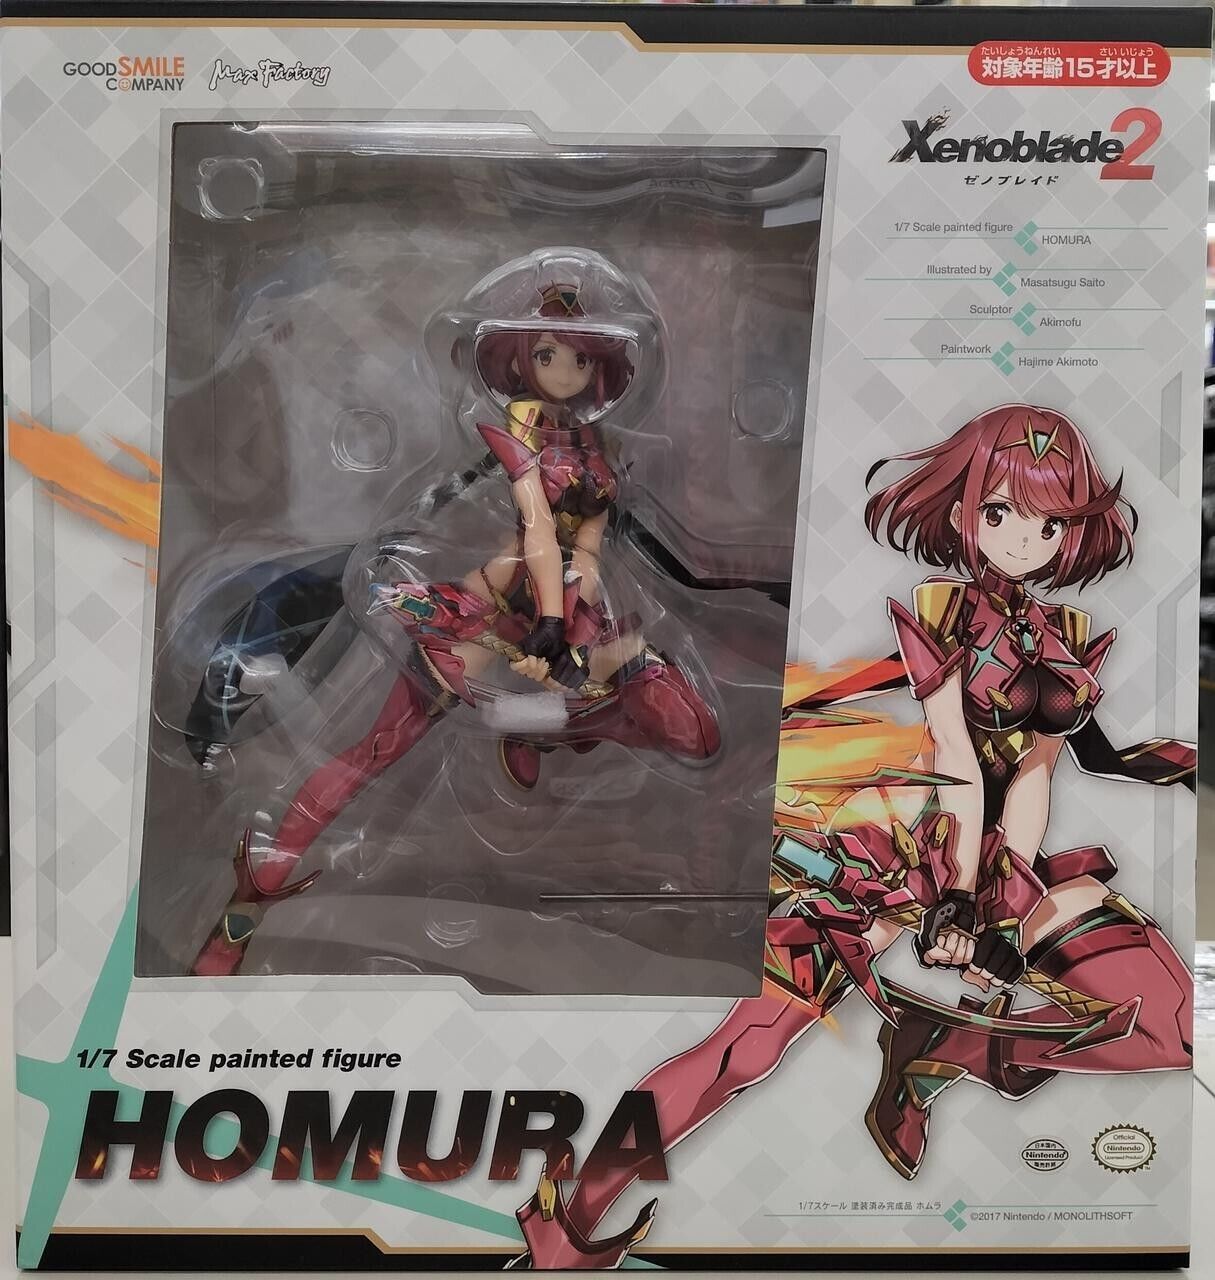 NEW Xenoblade 2 Homura 1/7 scale painted Figure Good Smile Company limited